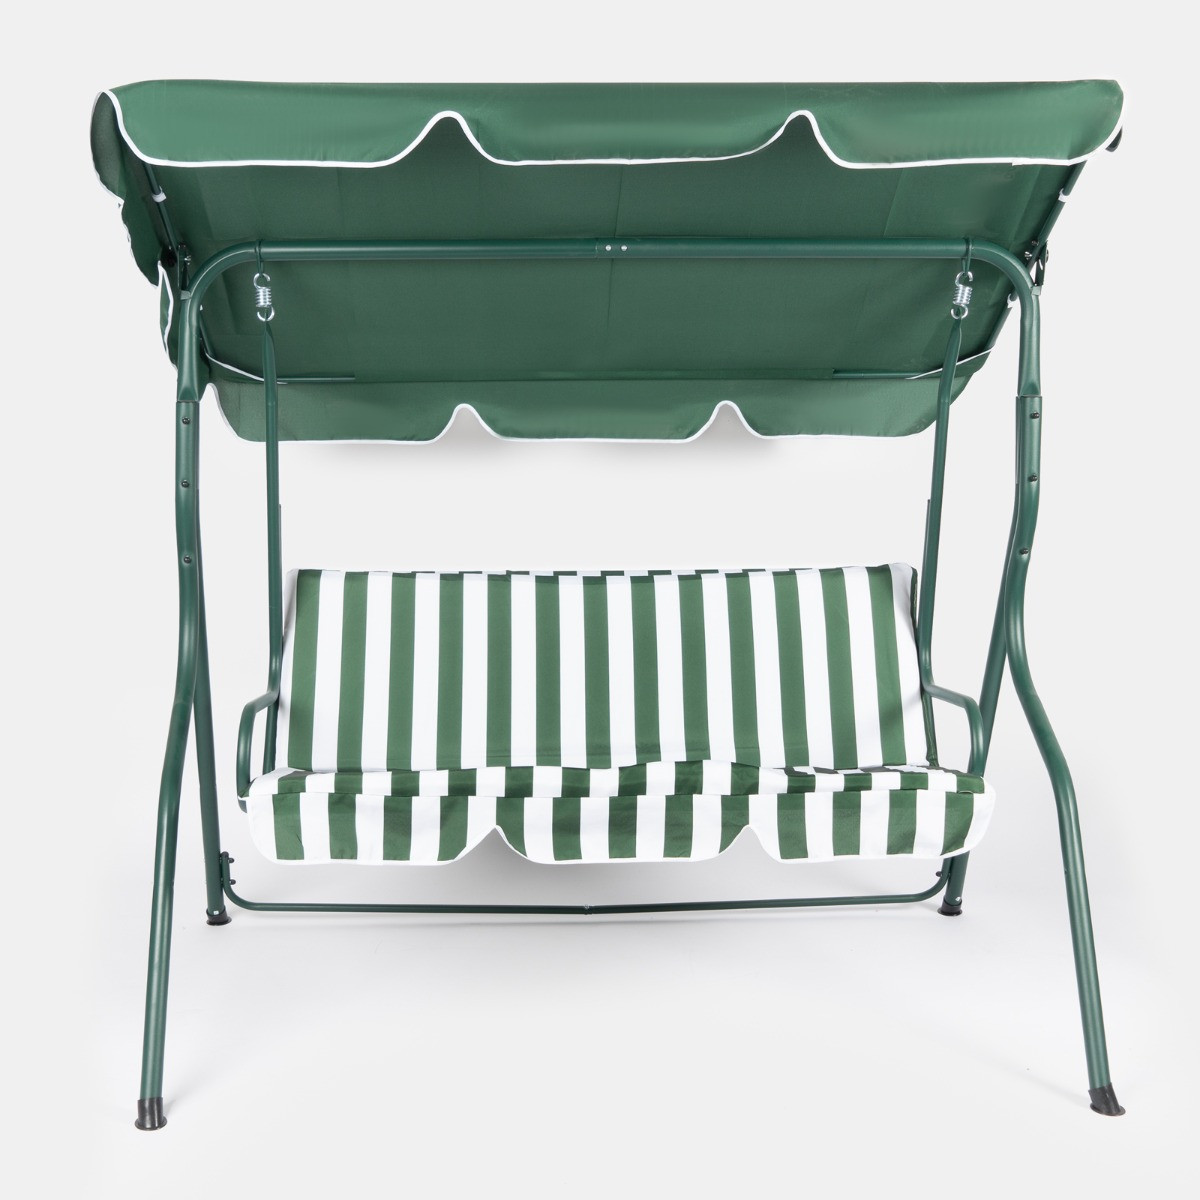 OHS 3 Seater Swing Bench With Canopy - Green / White Stripe>